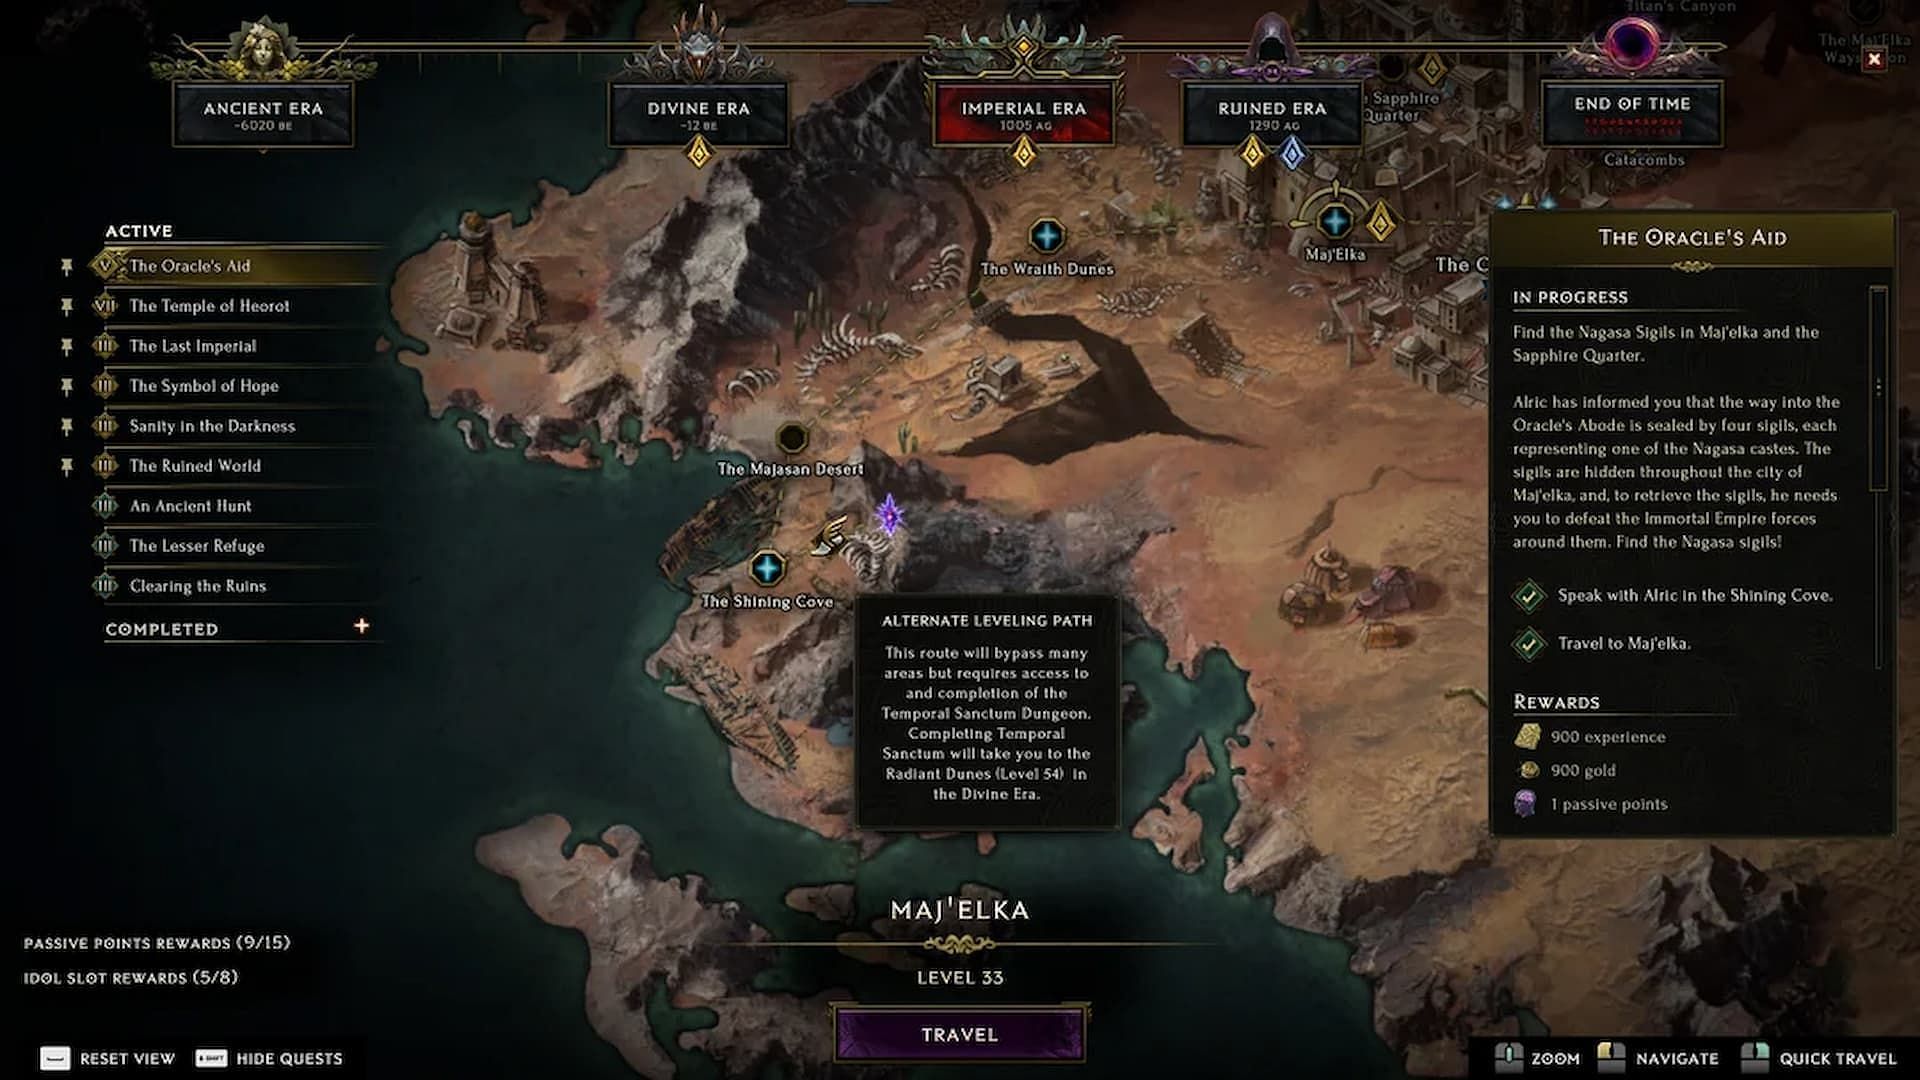 Alternate Leveling Paths in Last Epoch are dungeons that can bypass a part of the campaign. (Image via Eleventh Hour Games)